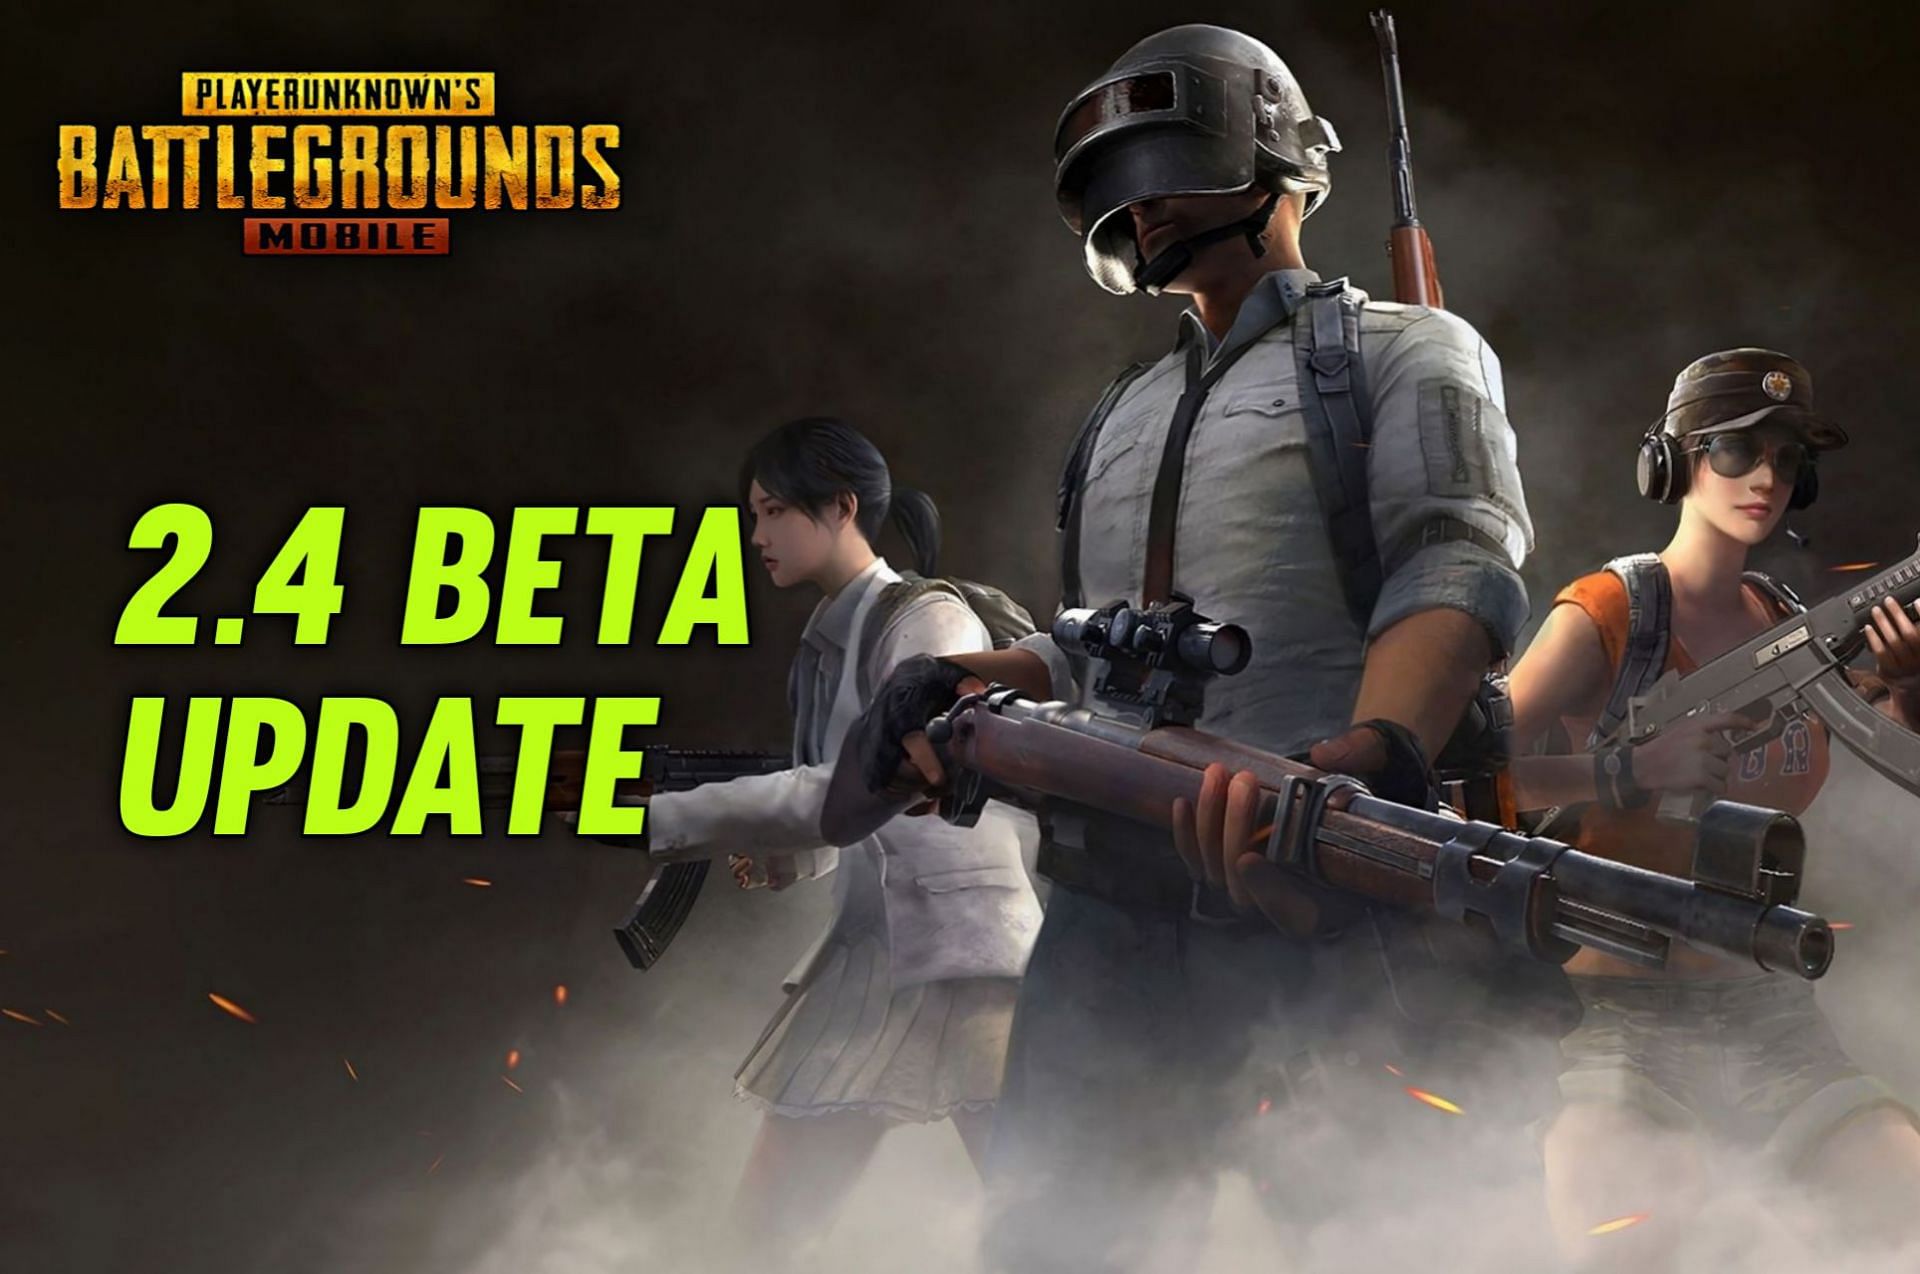 The wait is over as much-awaited PUBG Mobile 2.4 beta is here (Image via Sportskeeda)